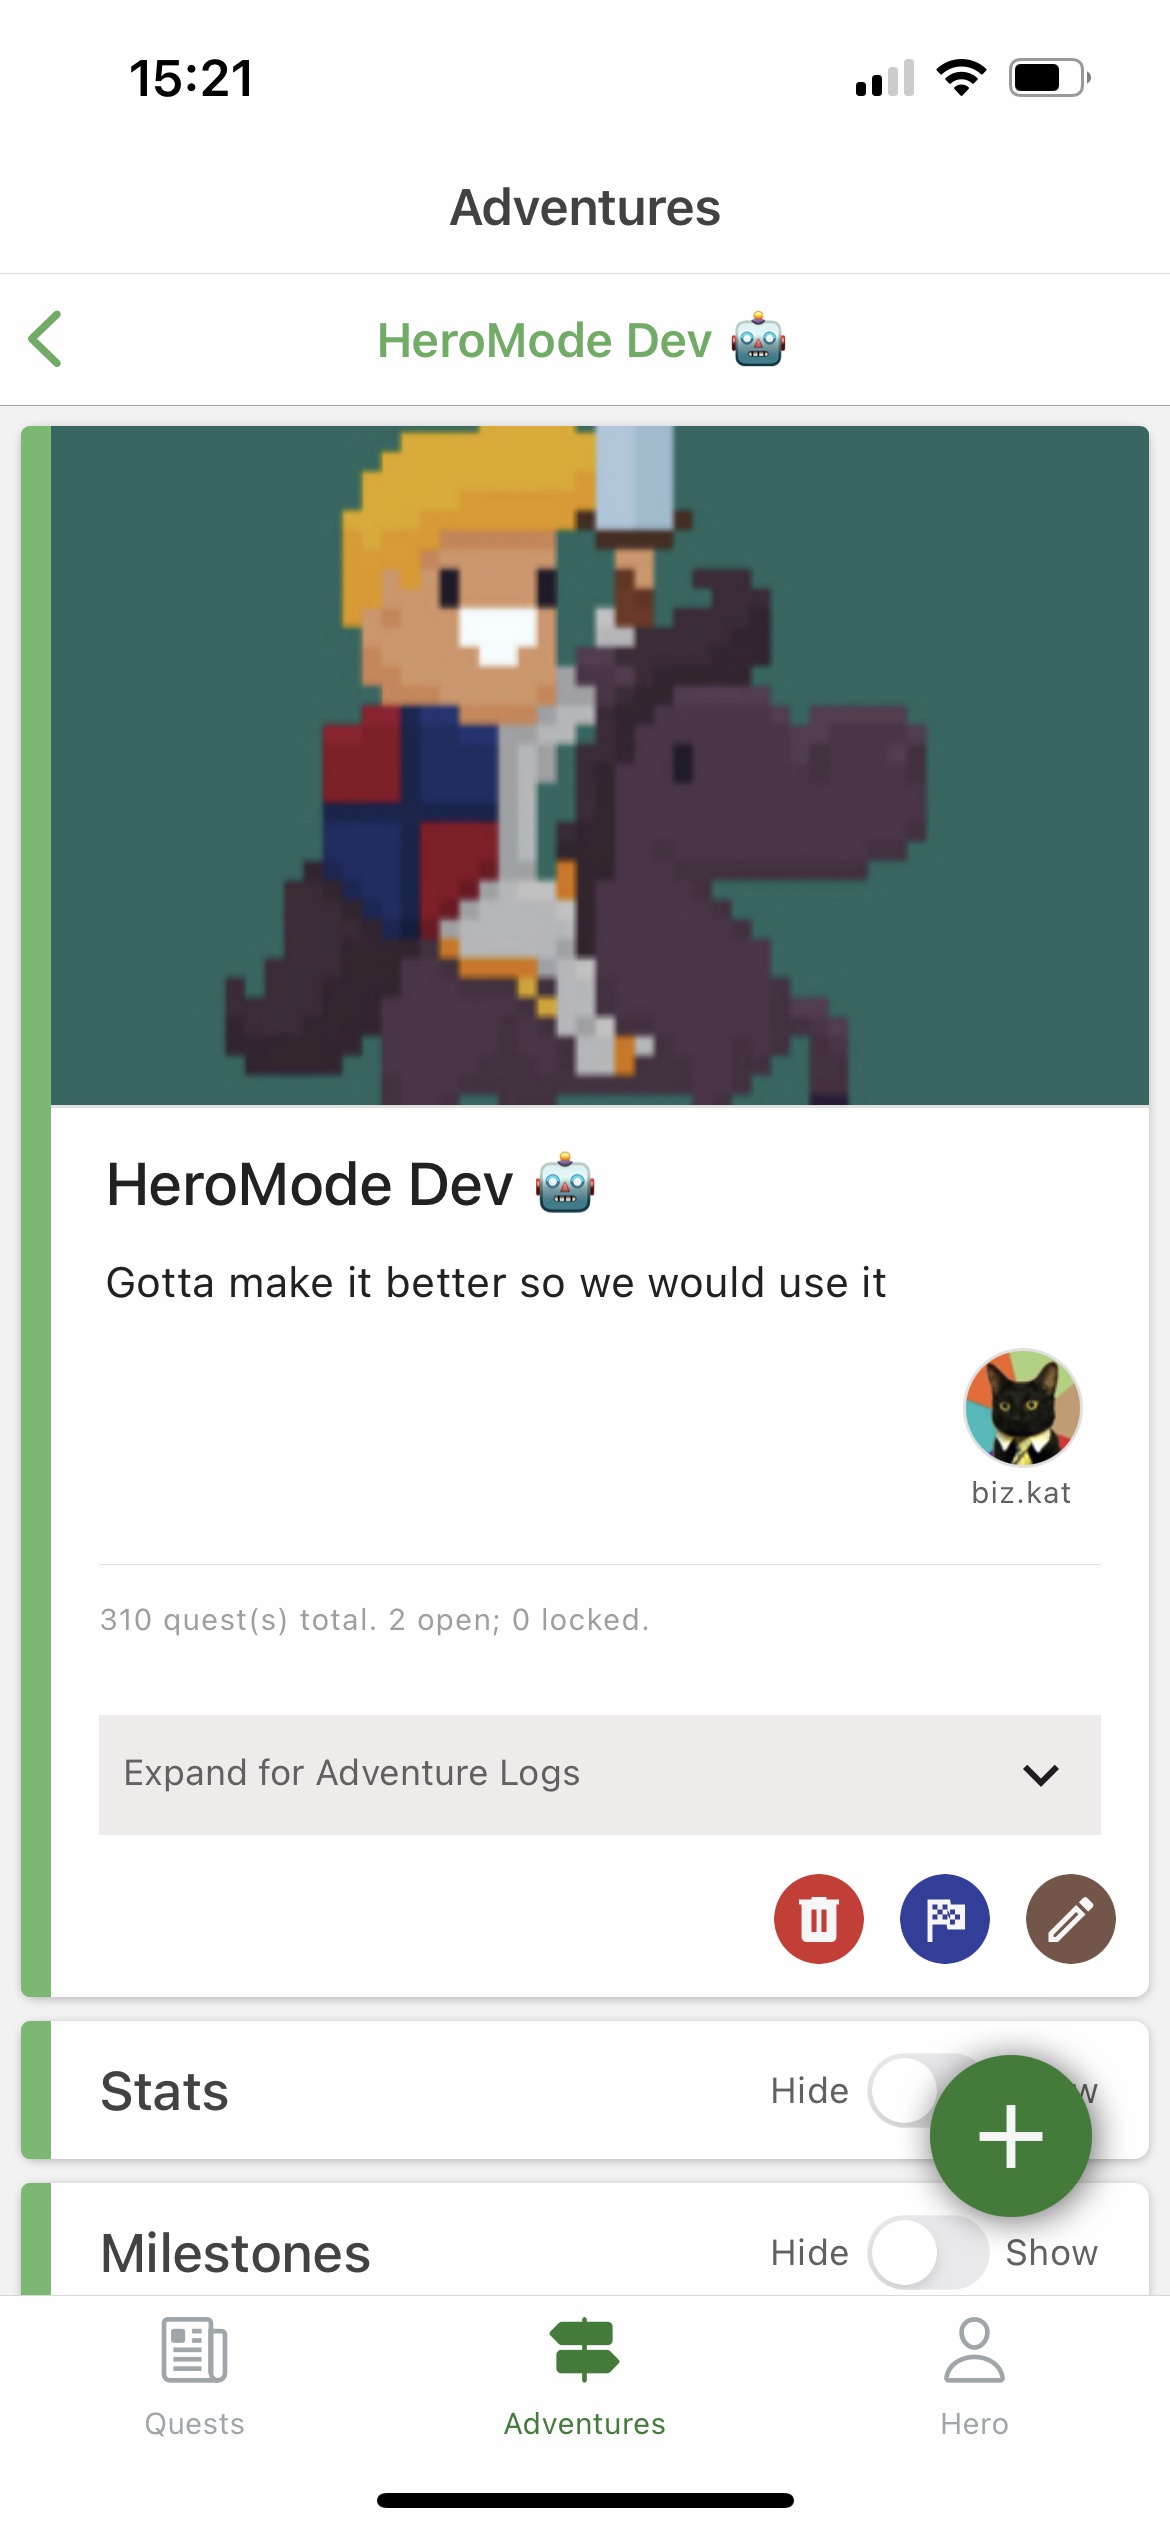 heromode project management is an adventure in heromode app